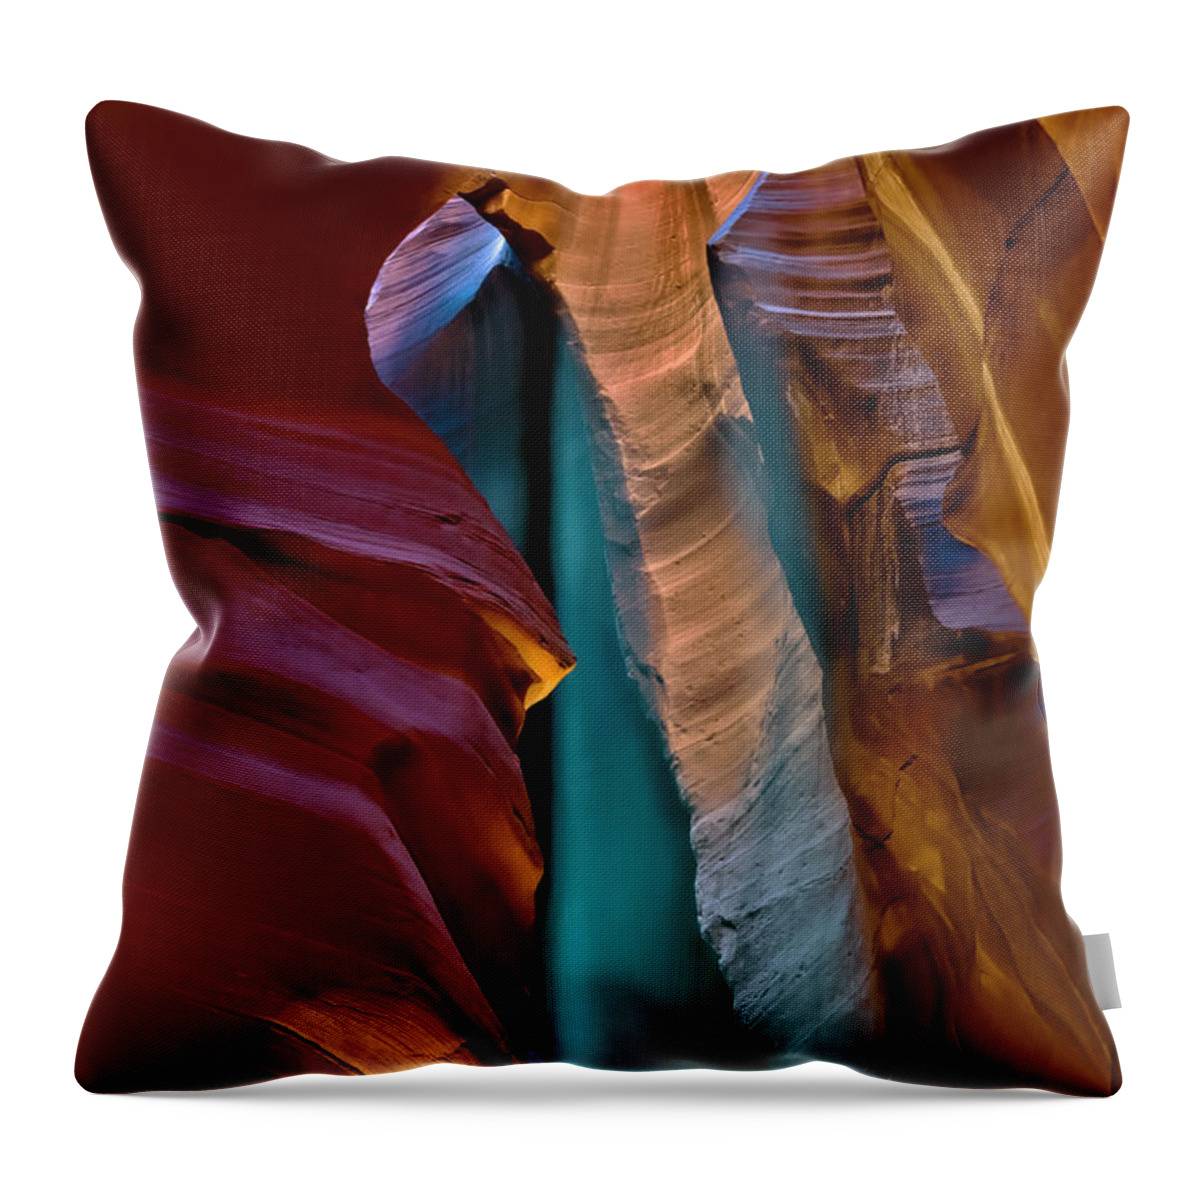 Antelope Canyon Throw Pillow featuring the photograph Radiant Light by Dan McGeorge